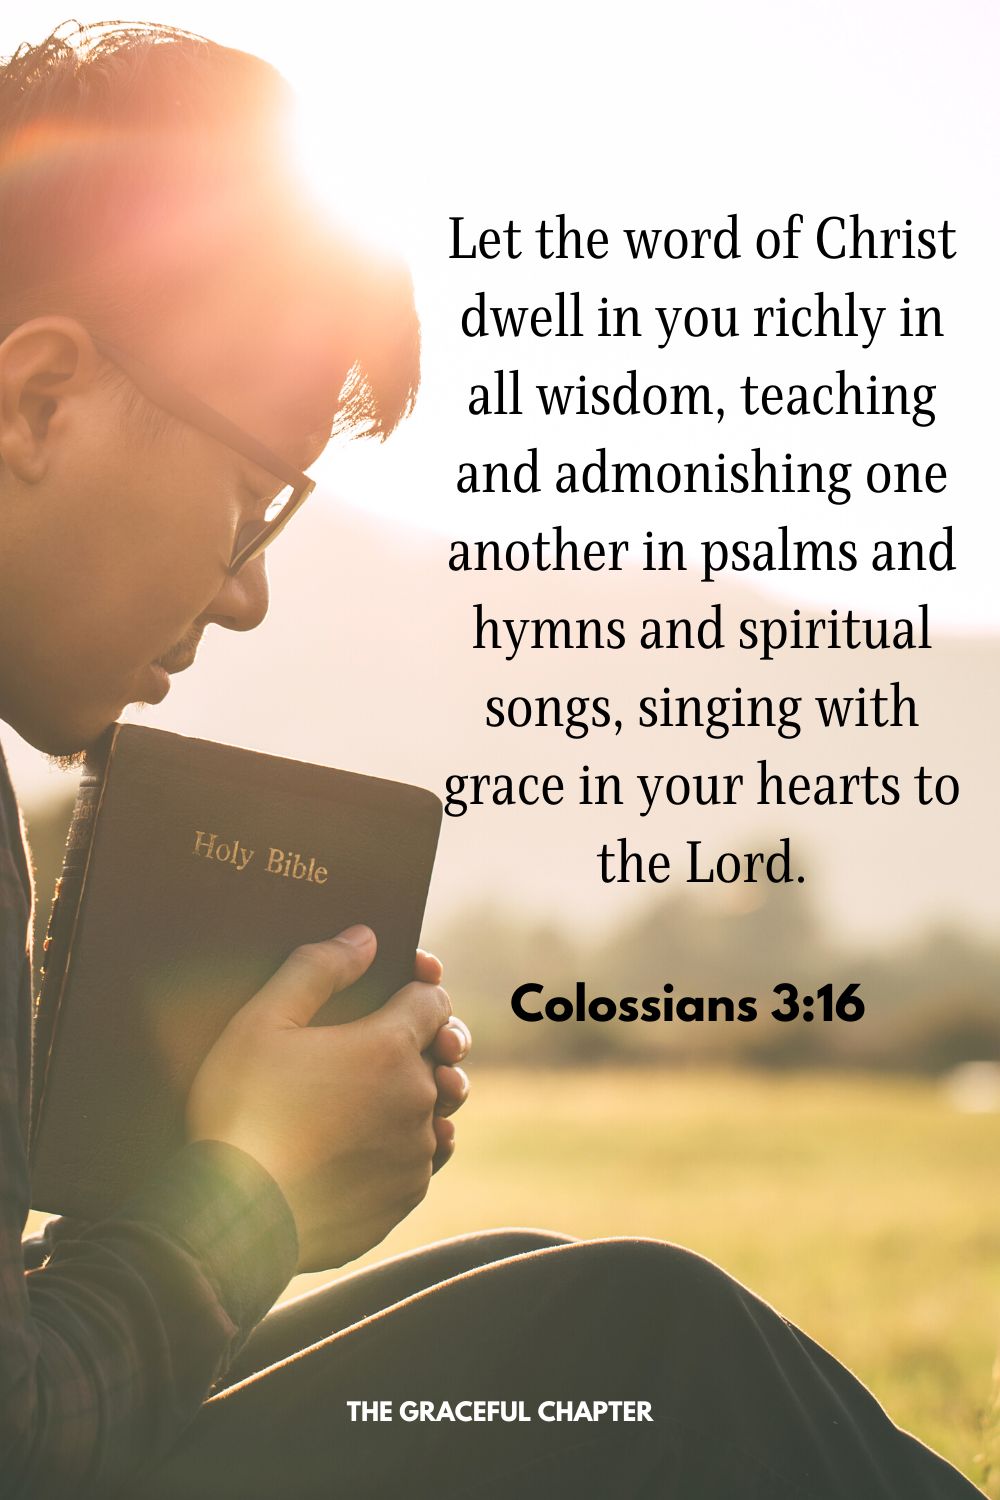 Let the word of Christ dwell in you richly in all wisdom, teaching and admonishing one another in psalms and hymns and spiritual songs, singing with grace in your hearts to the Lord. Colossians 3:16